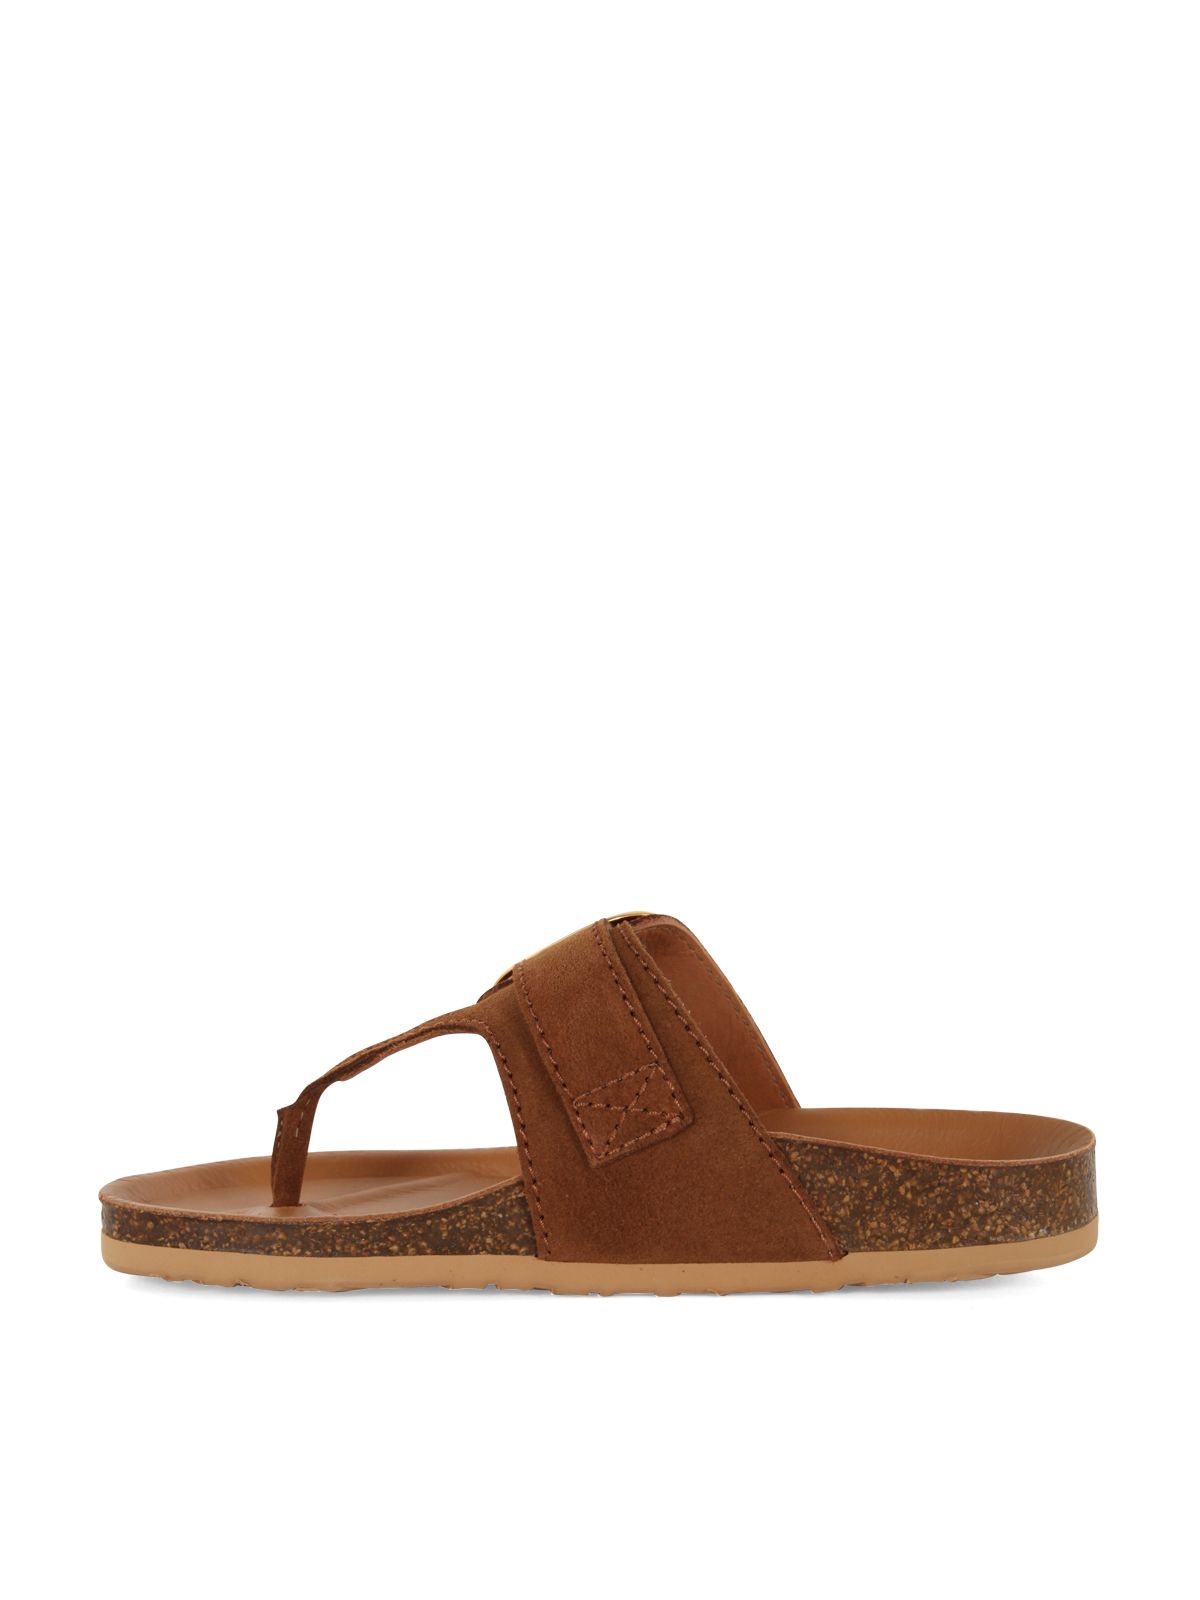 Shop See By Chloé Women's Sandals: Chany Fussbett